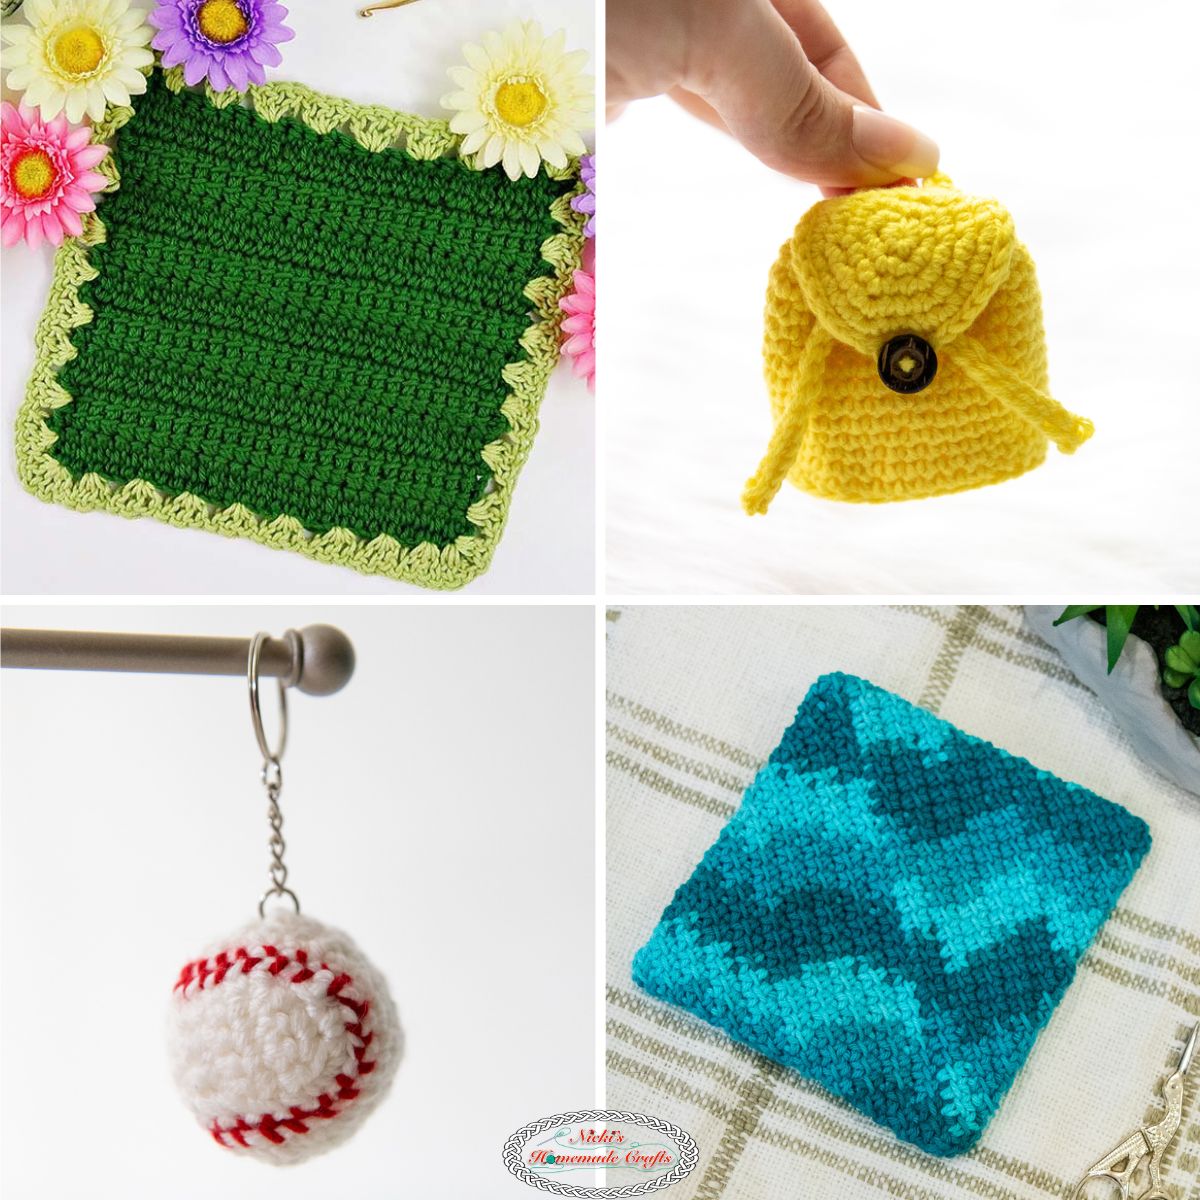 Crochet Educational Articles Archives - Nicki's Homemade Crafts